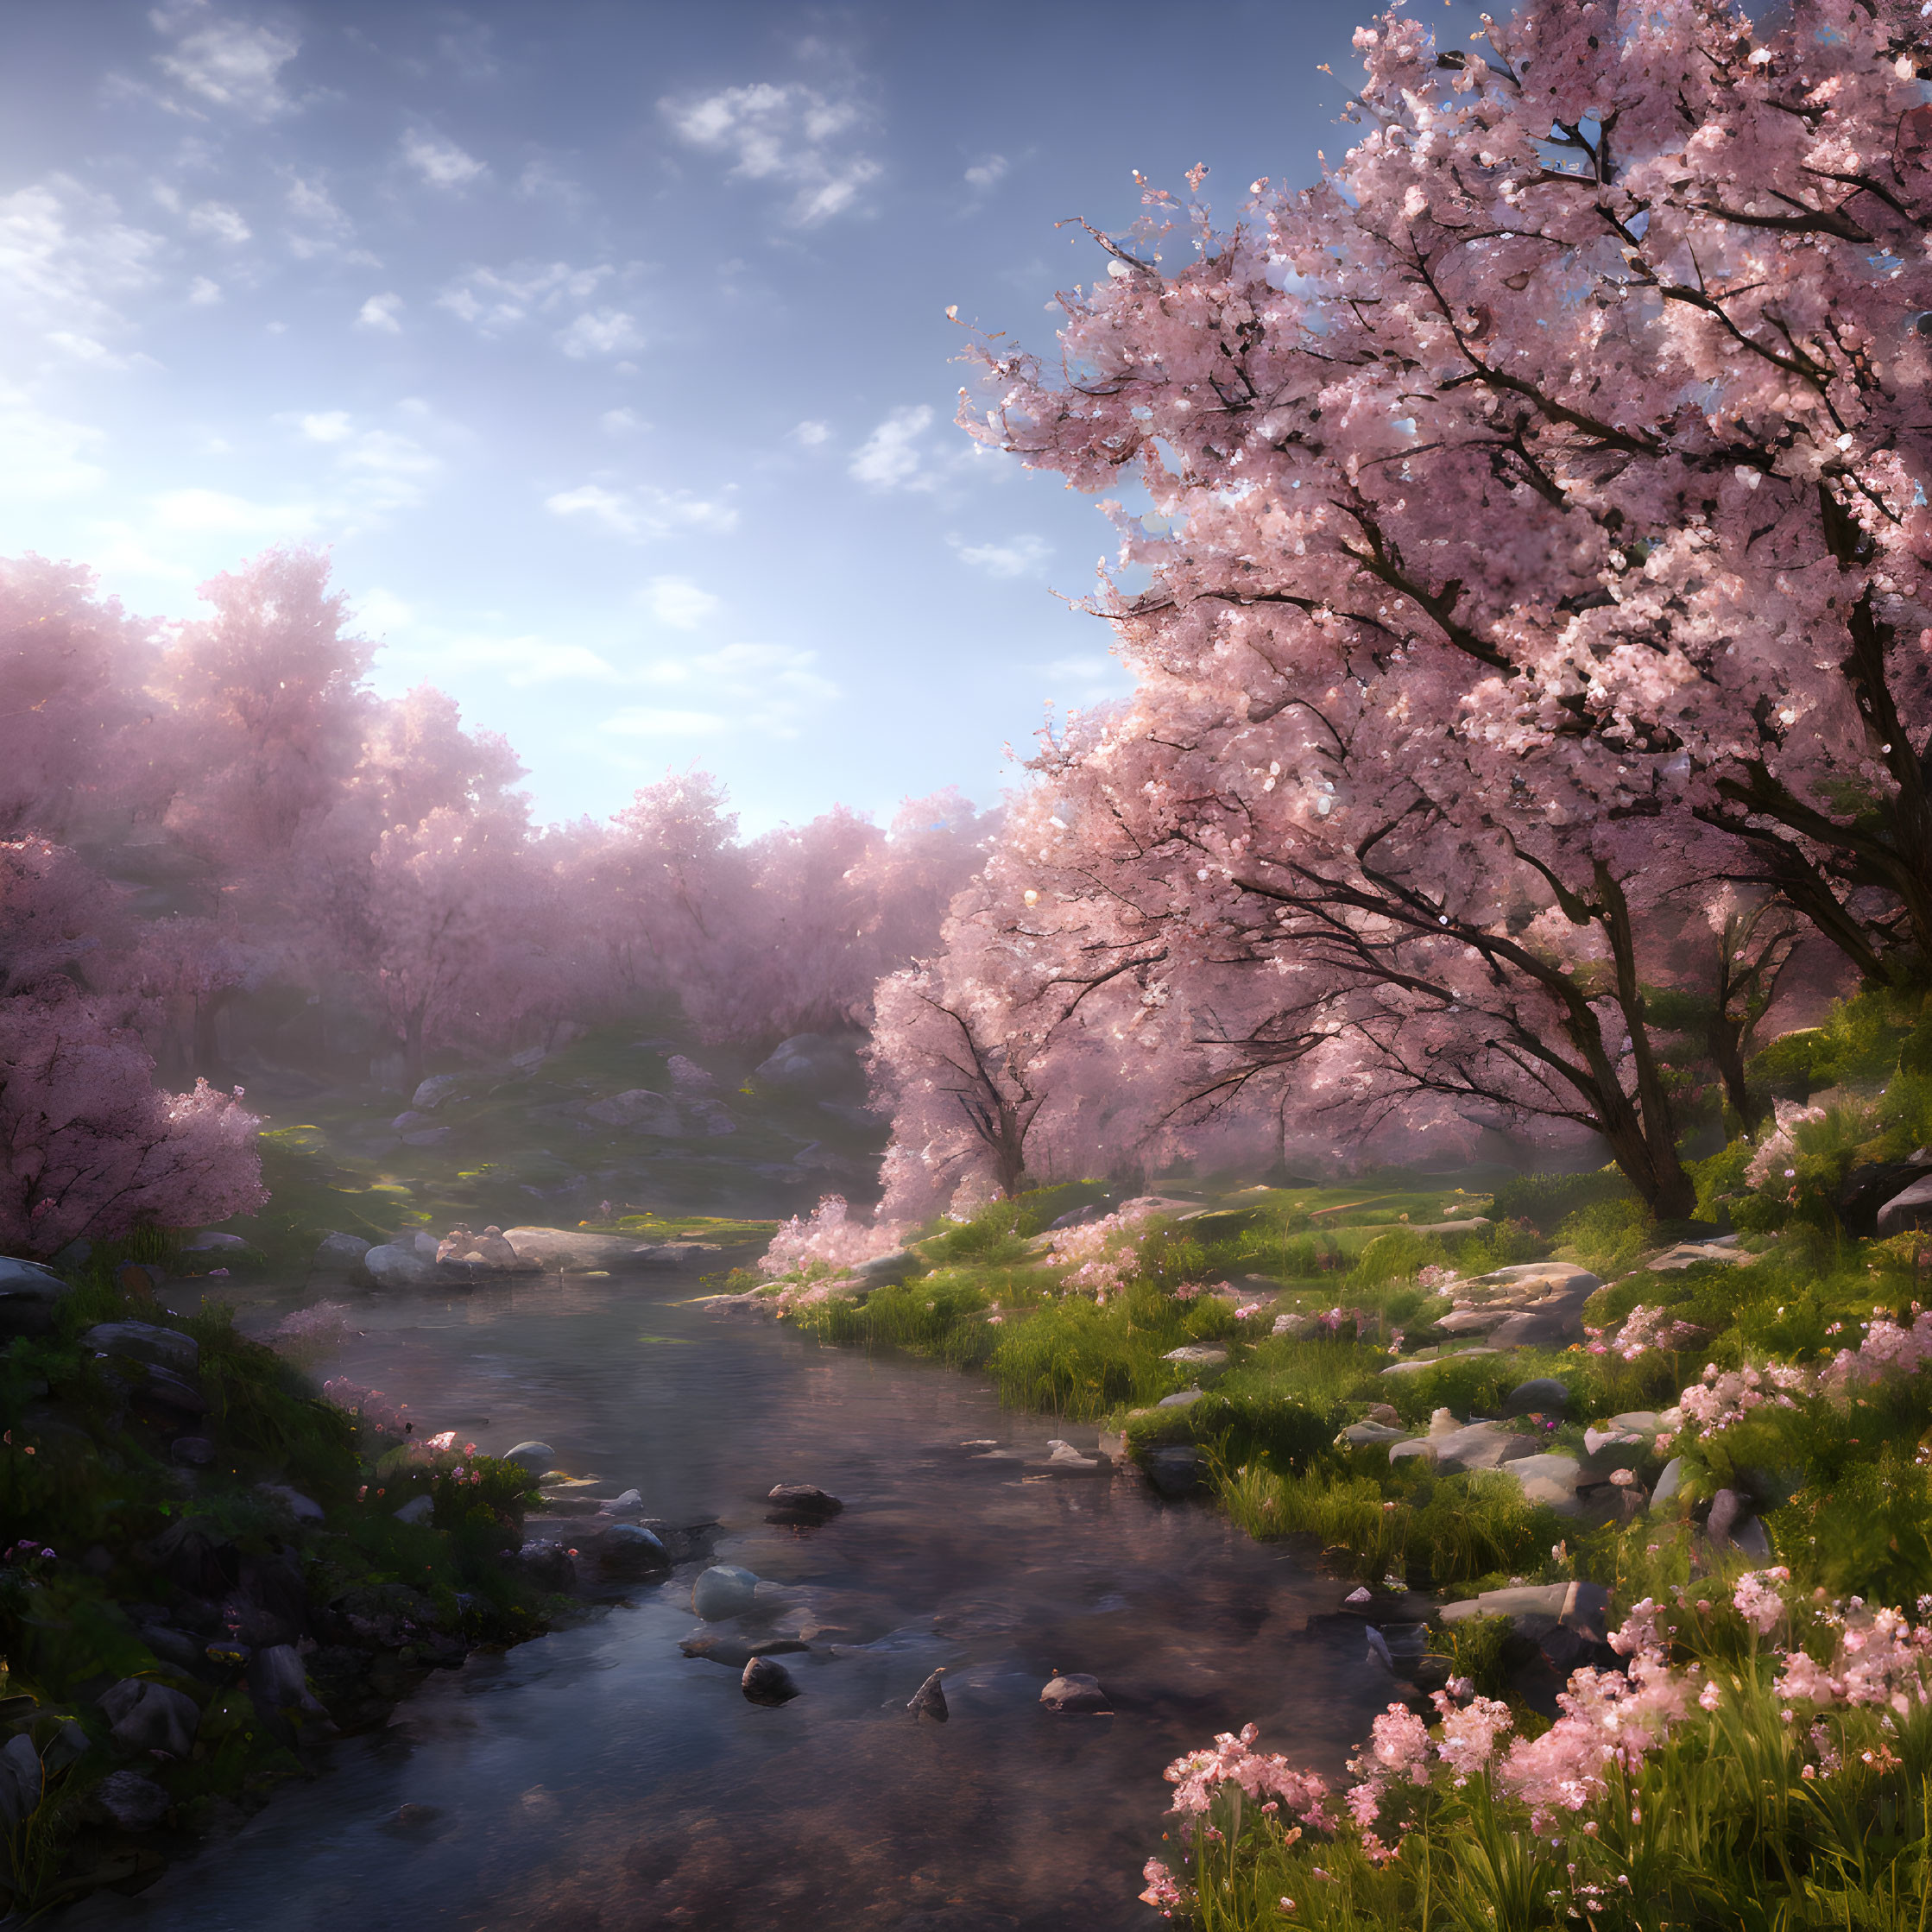 Tranquil landscape with stream and cherry blossom trees